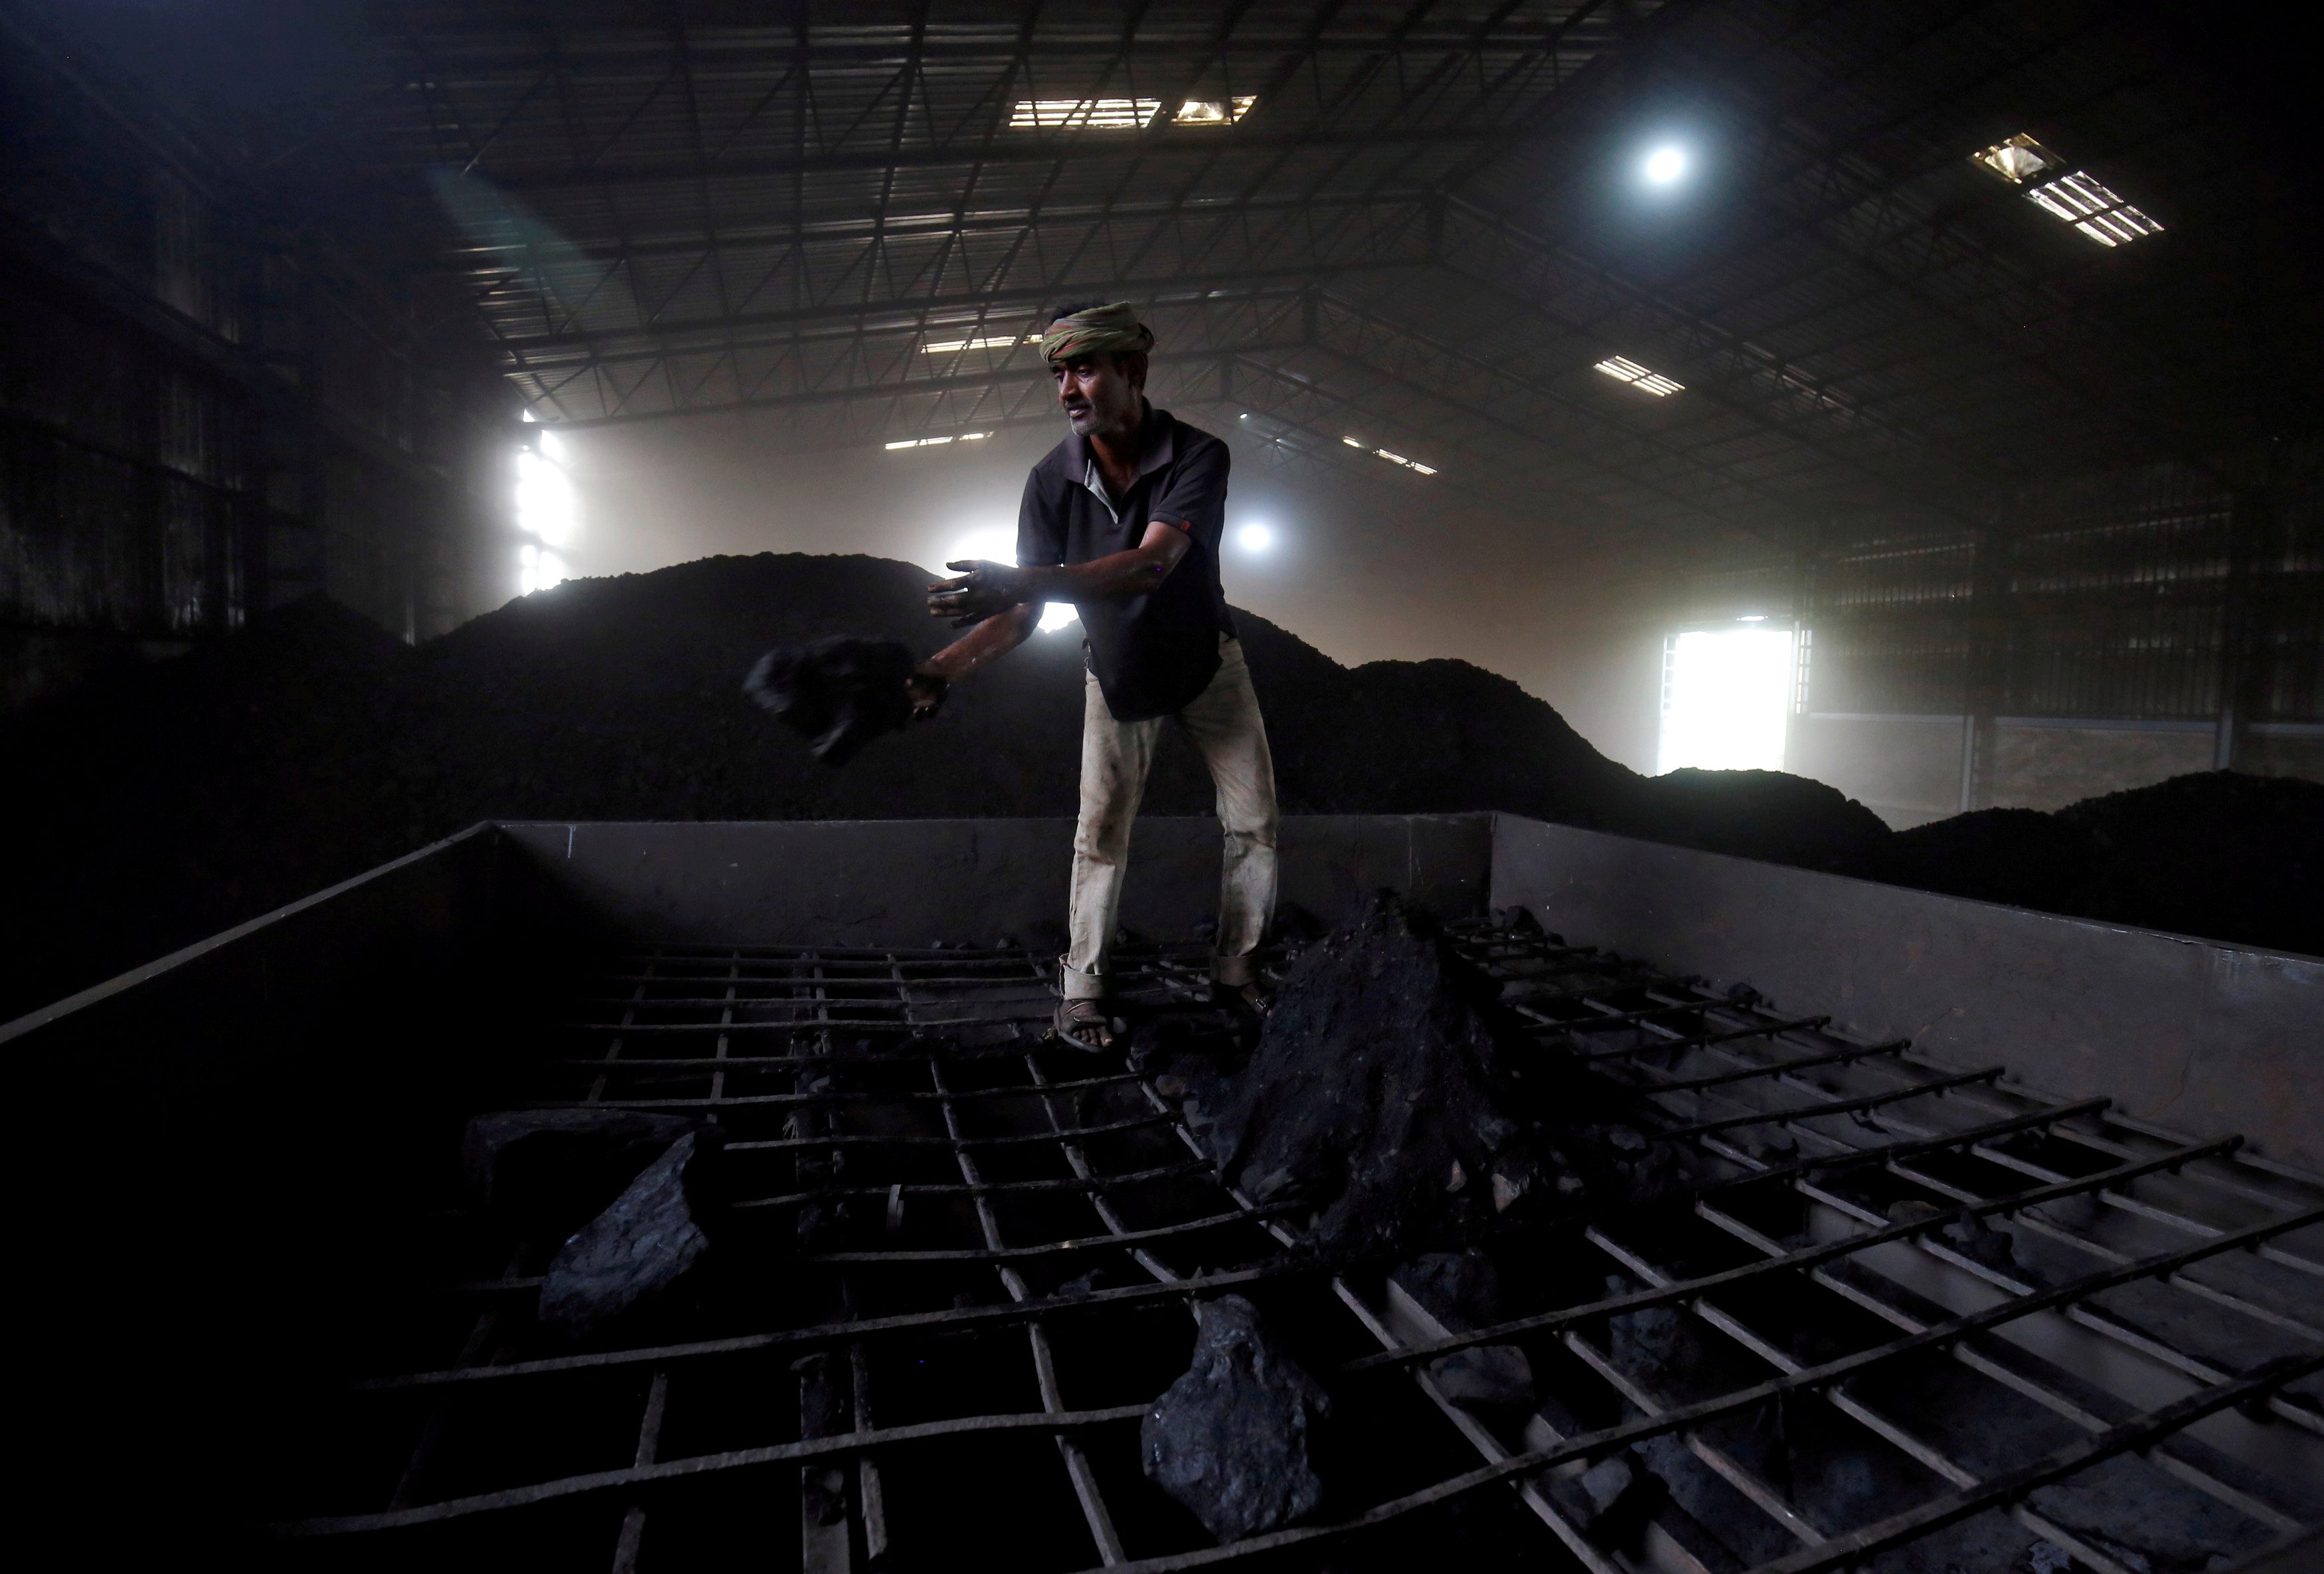 India asks utilities to import coal, warns states not to sell power on exchanges